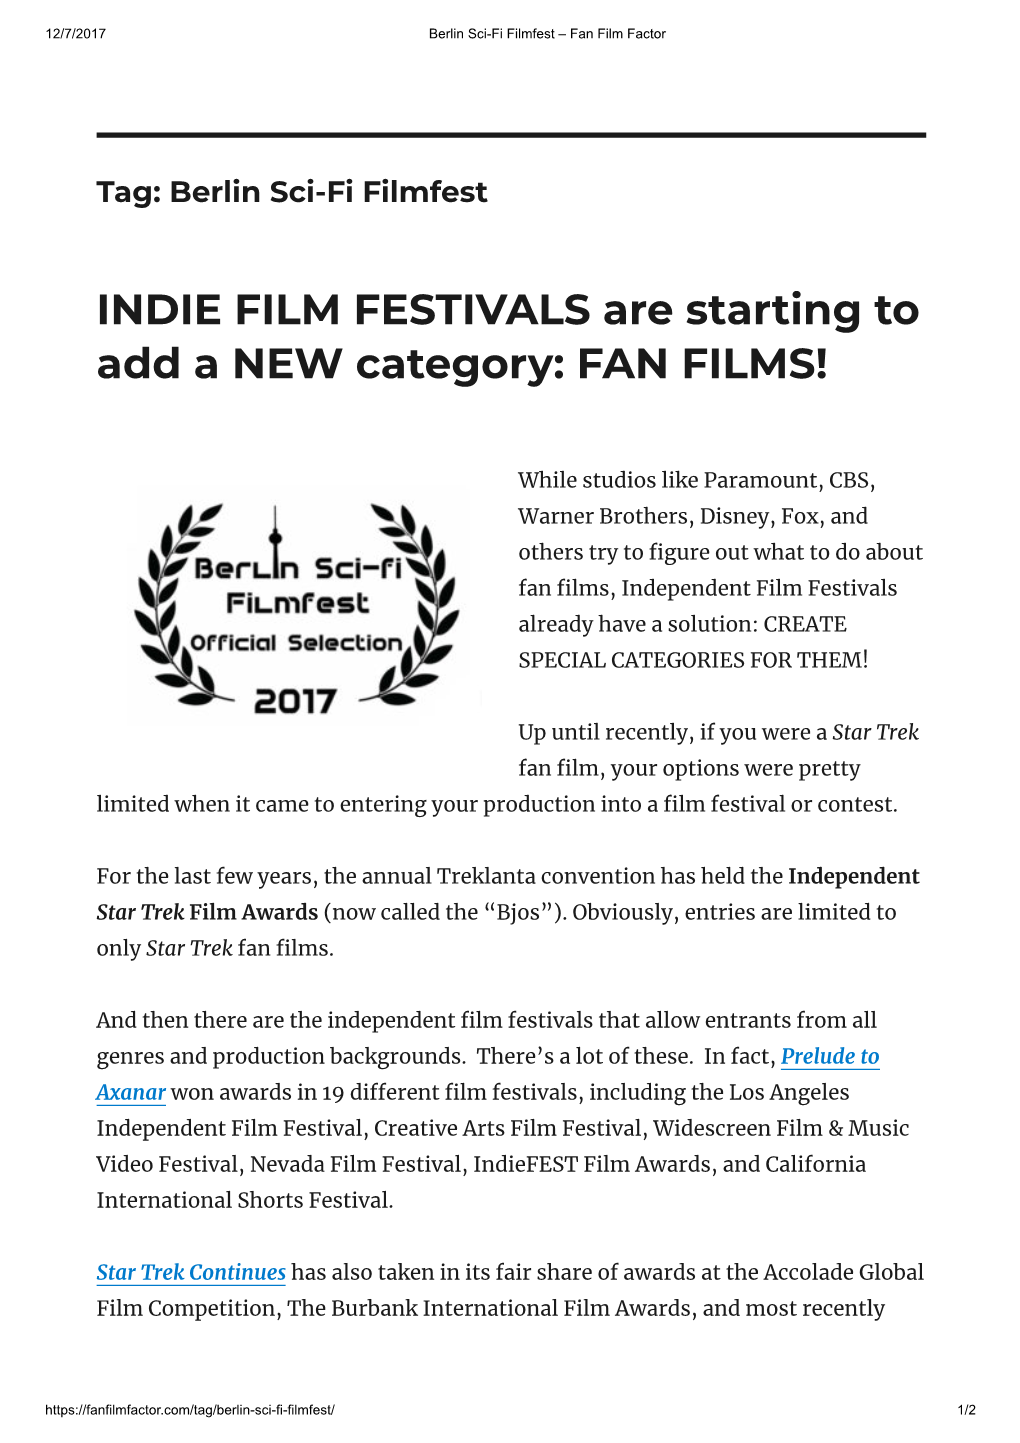 INDIE FILM FESTIVALS Are Starting to Add a NEW Category: FAN FILMS!